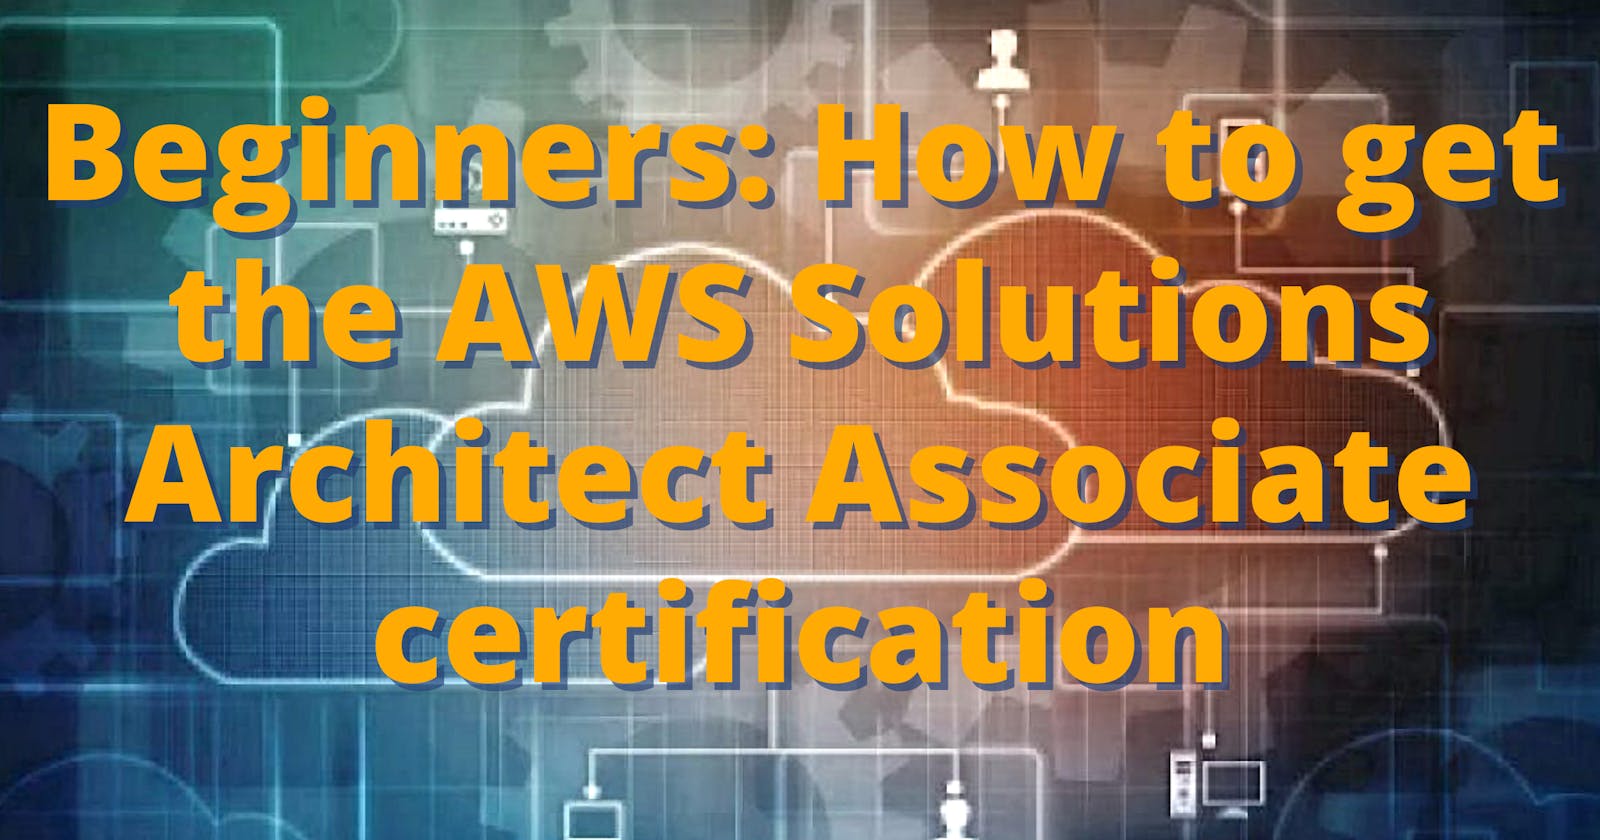 Beginners: How to get the AWS Solutions Architect Associate certification